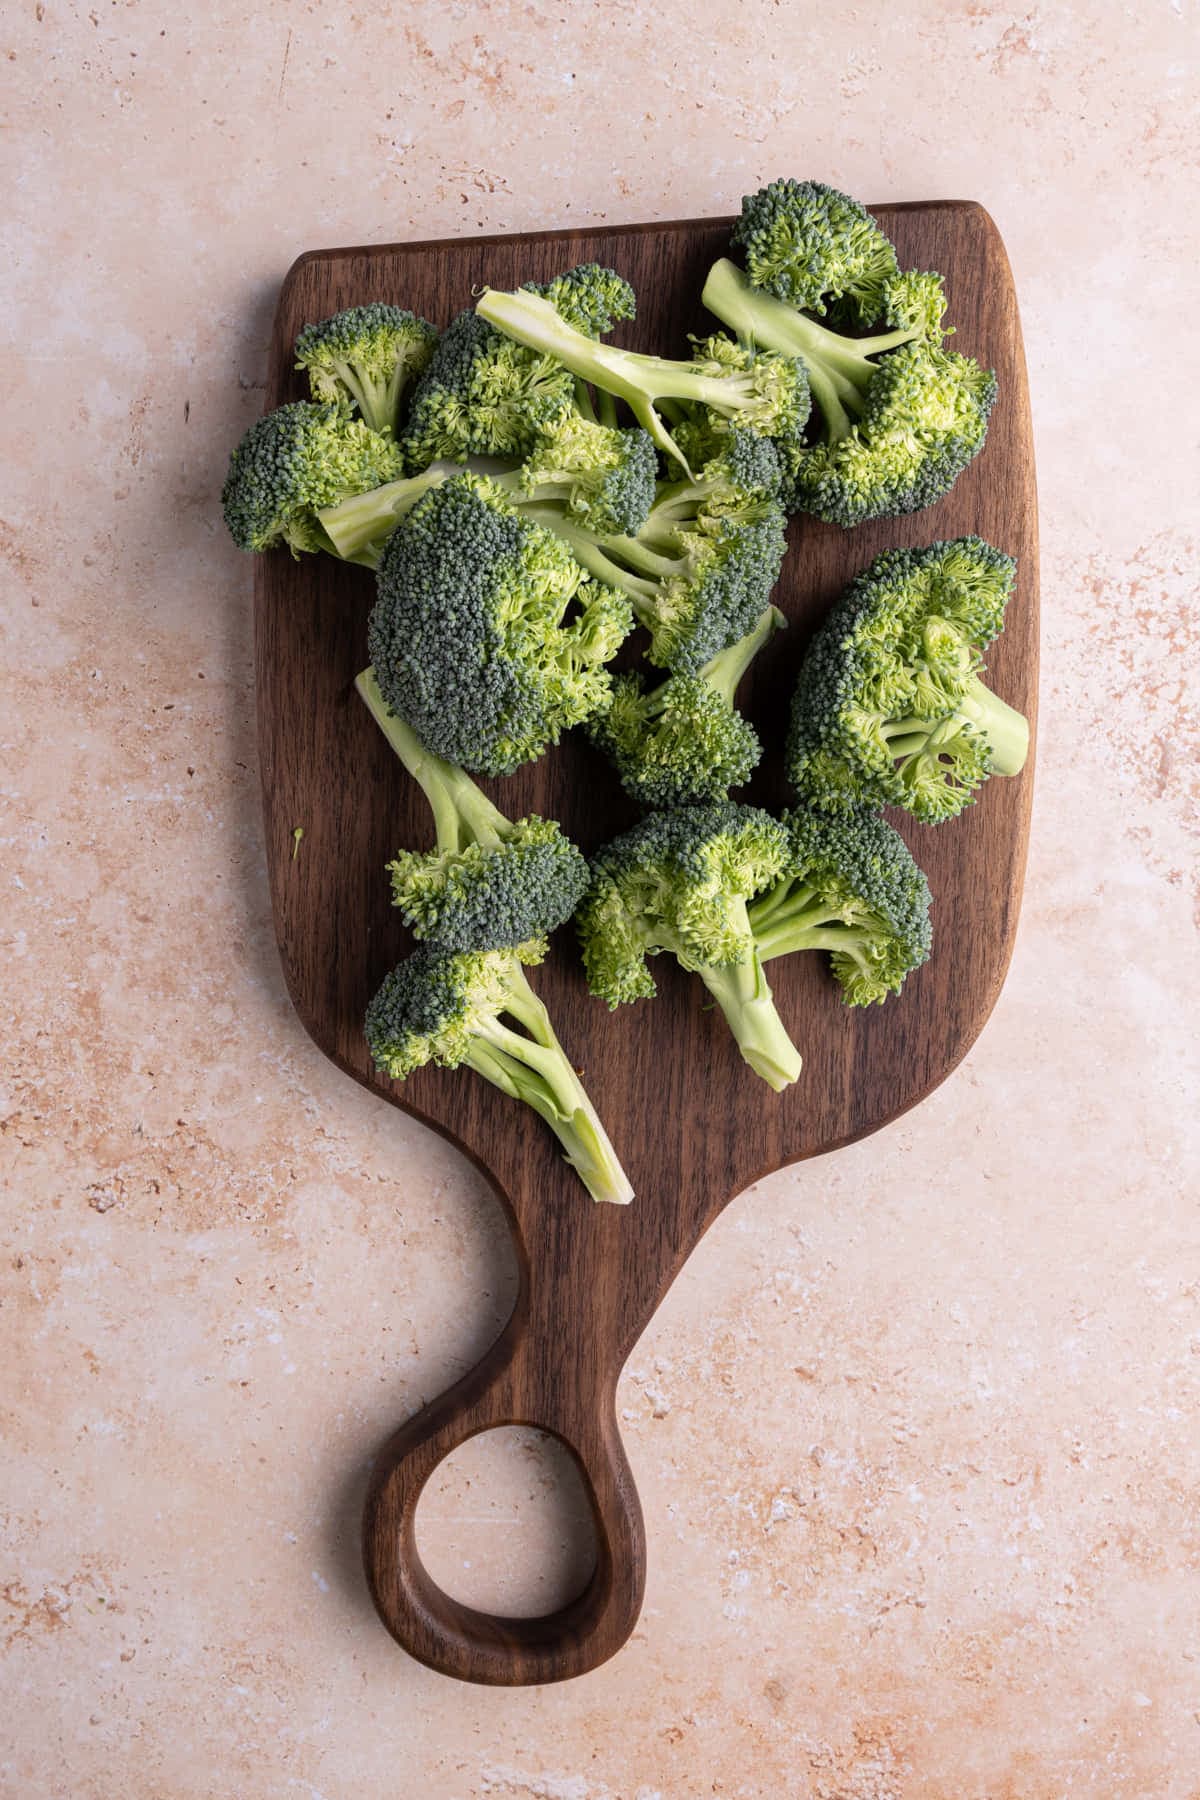 Broccoli that has been cut off the stems and chopped into roughly equal pieces